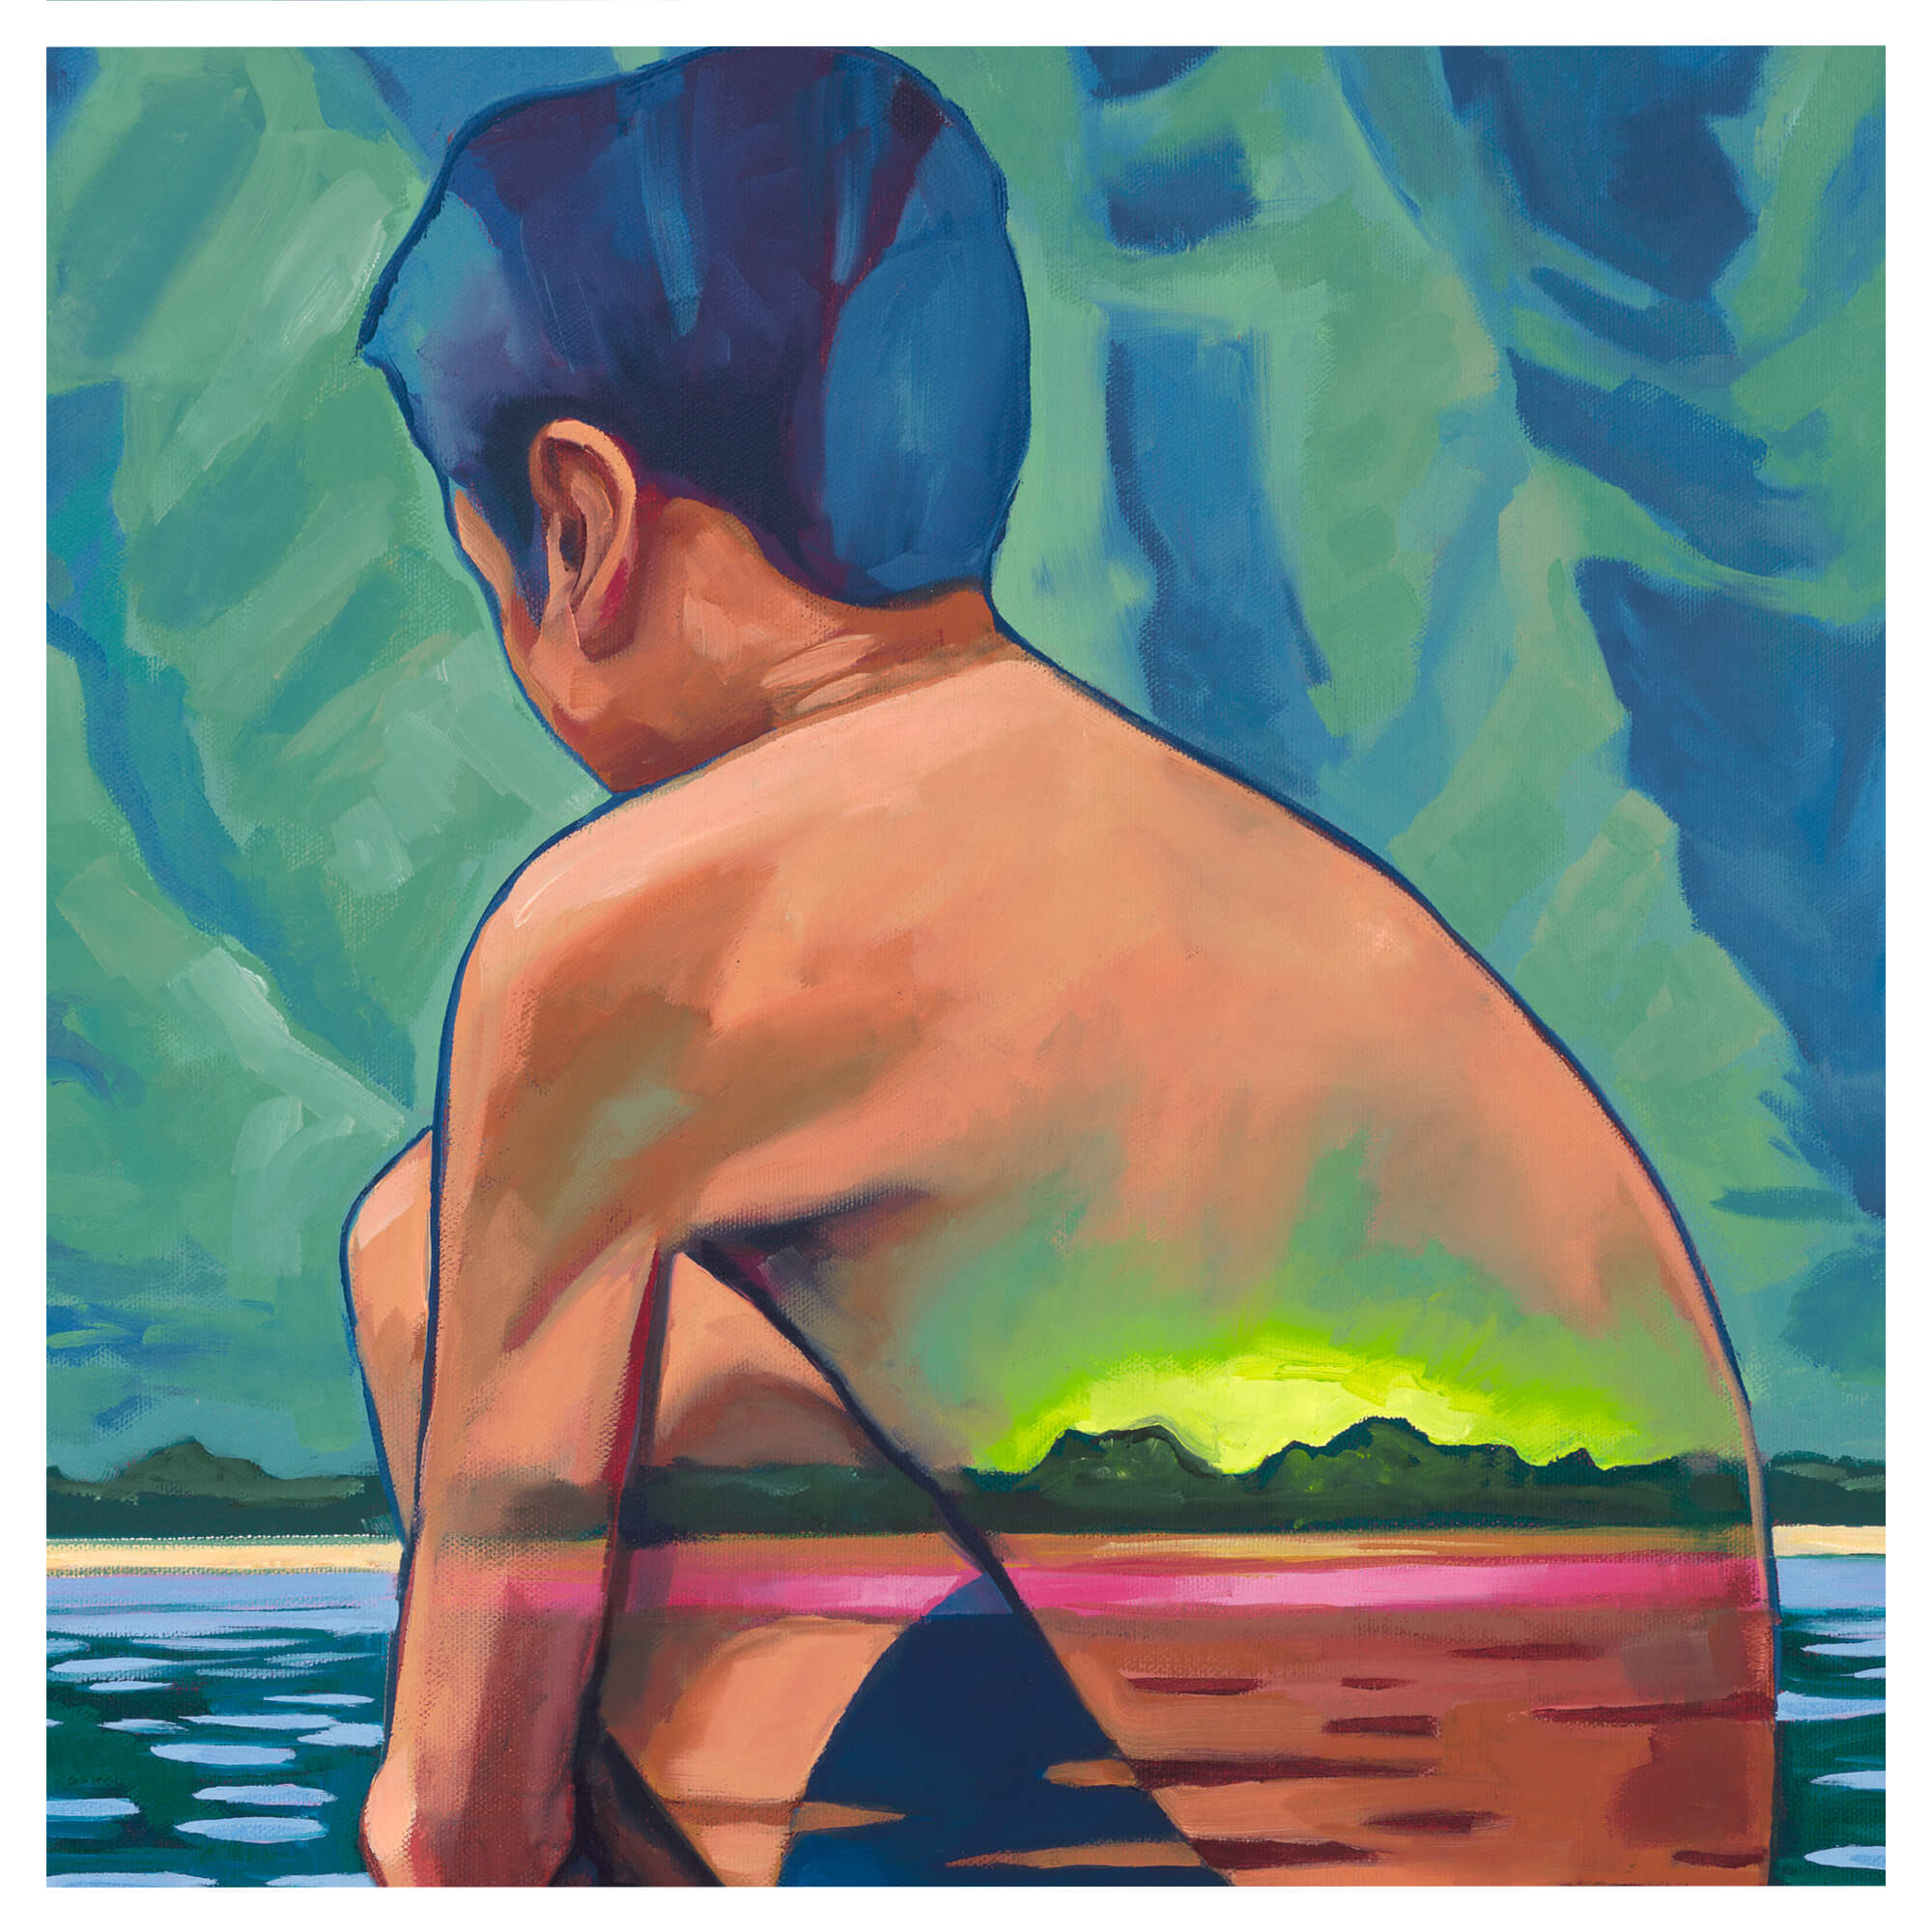 A boy about to jump in the water by Hawaii artist Colin redican